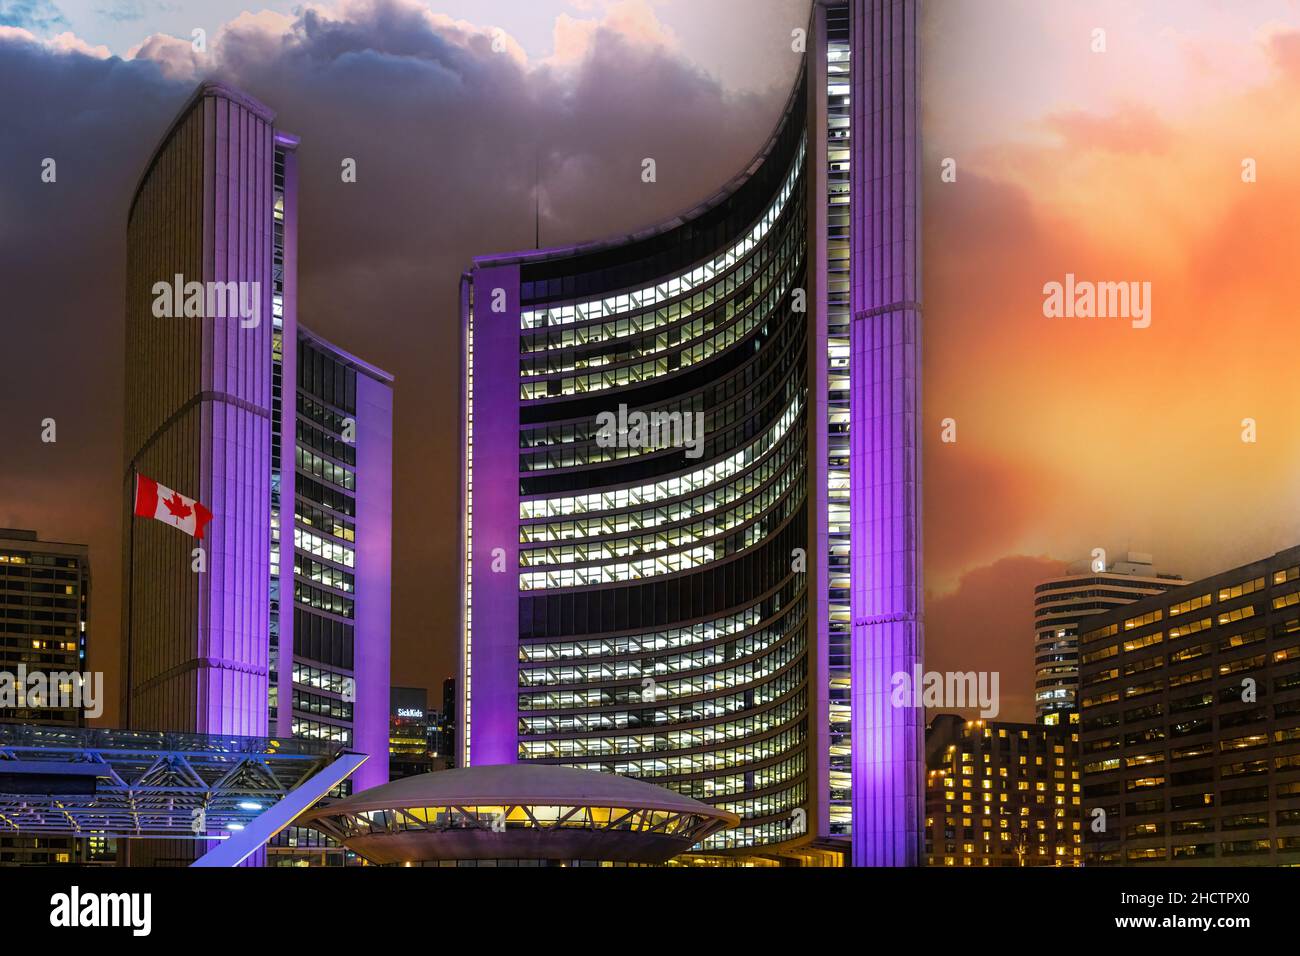 The new city hall or town hall illuminated in purple. The famous building is located in Nathan Phillips Square.  Dec. 29, 2021 Stock Photo